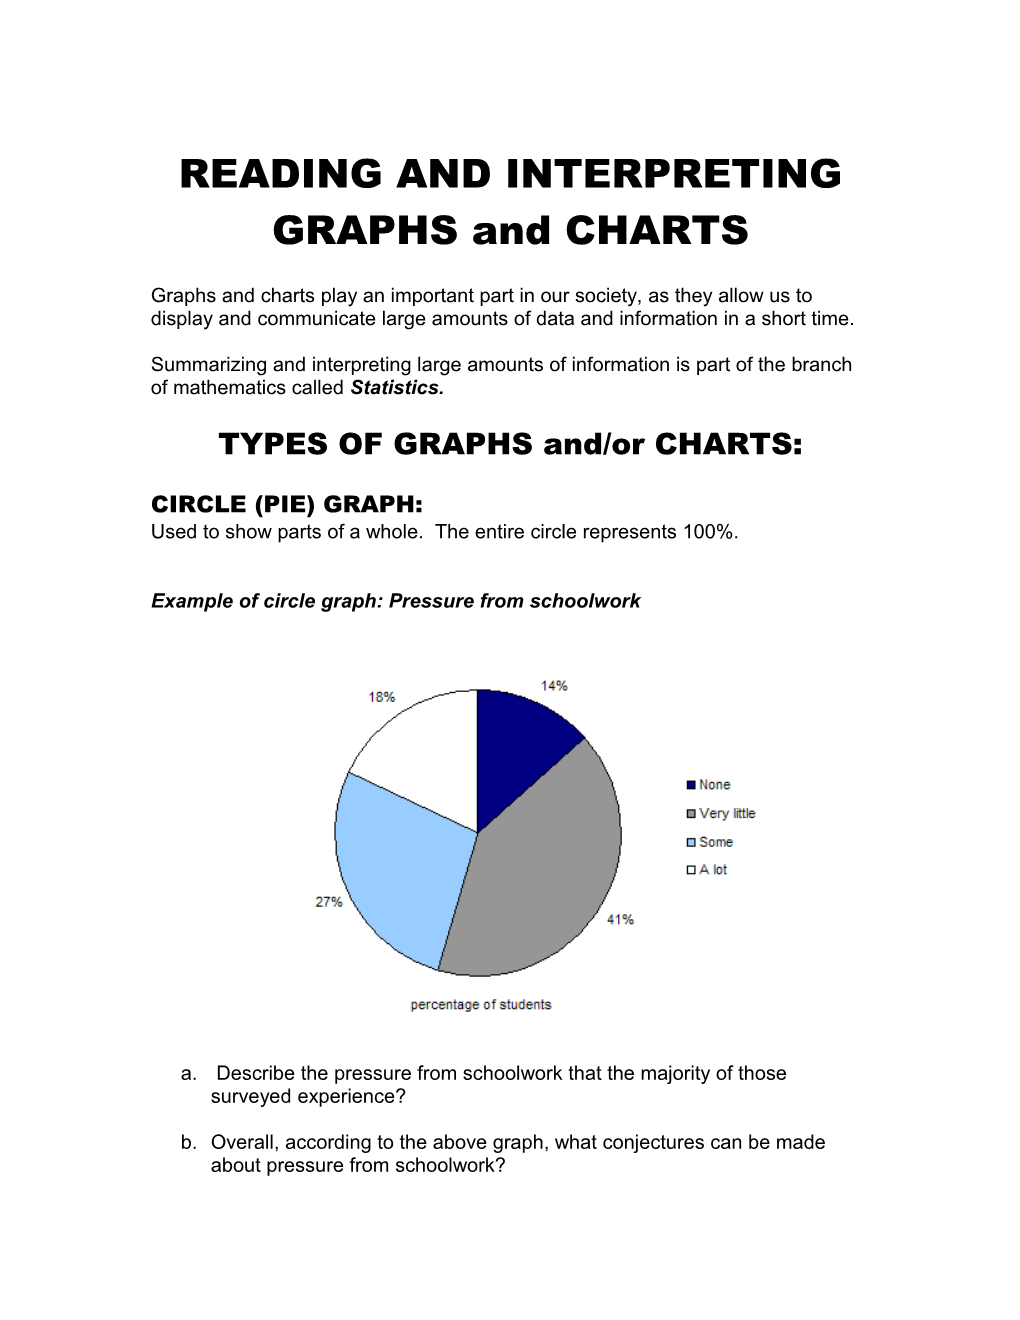 Lesson 1: Reading and Interpreting Graphs